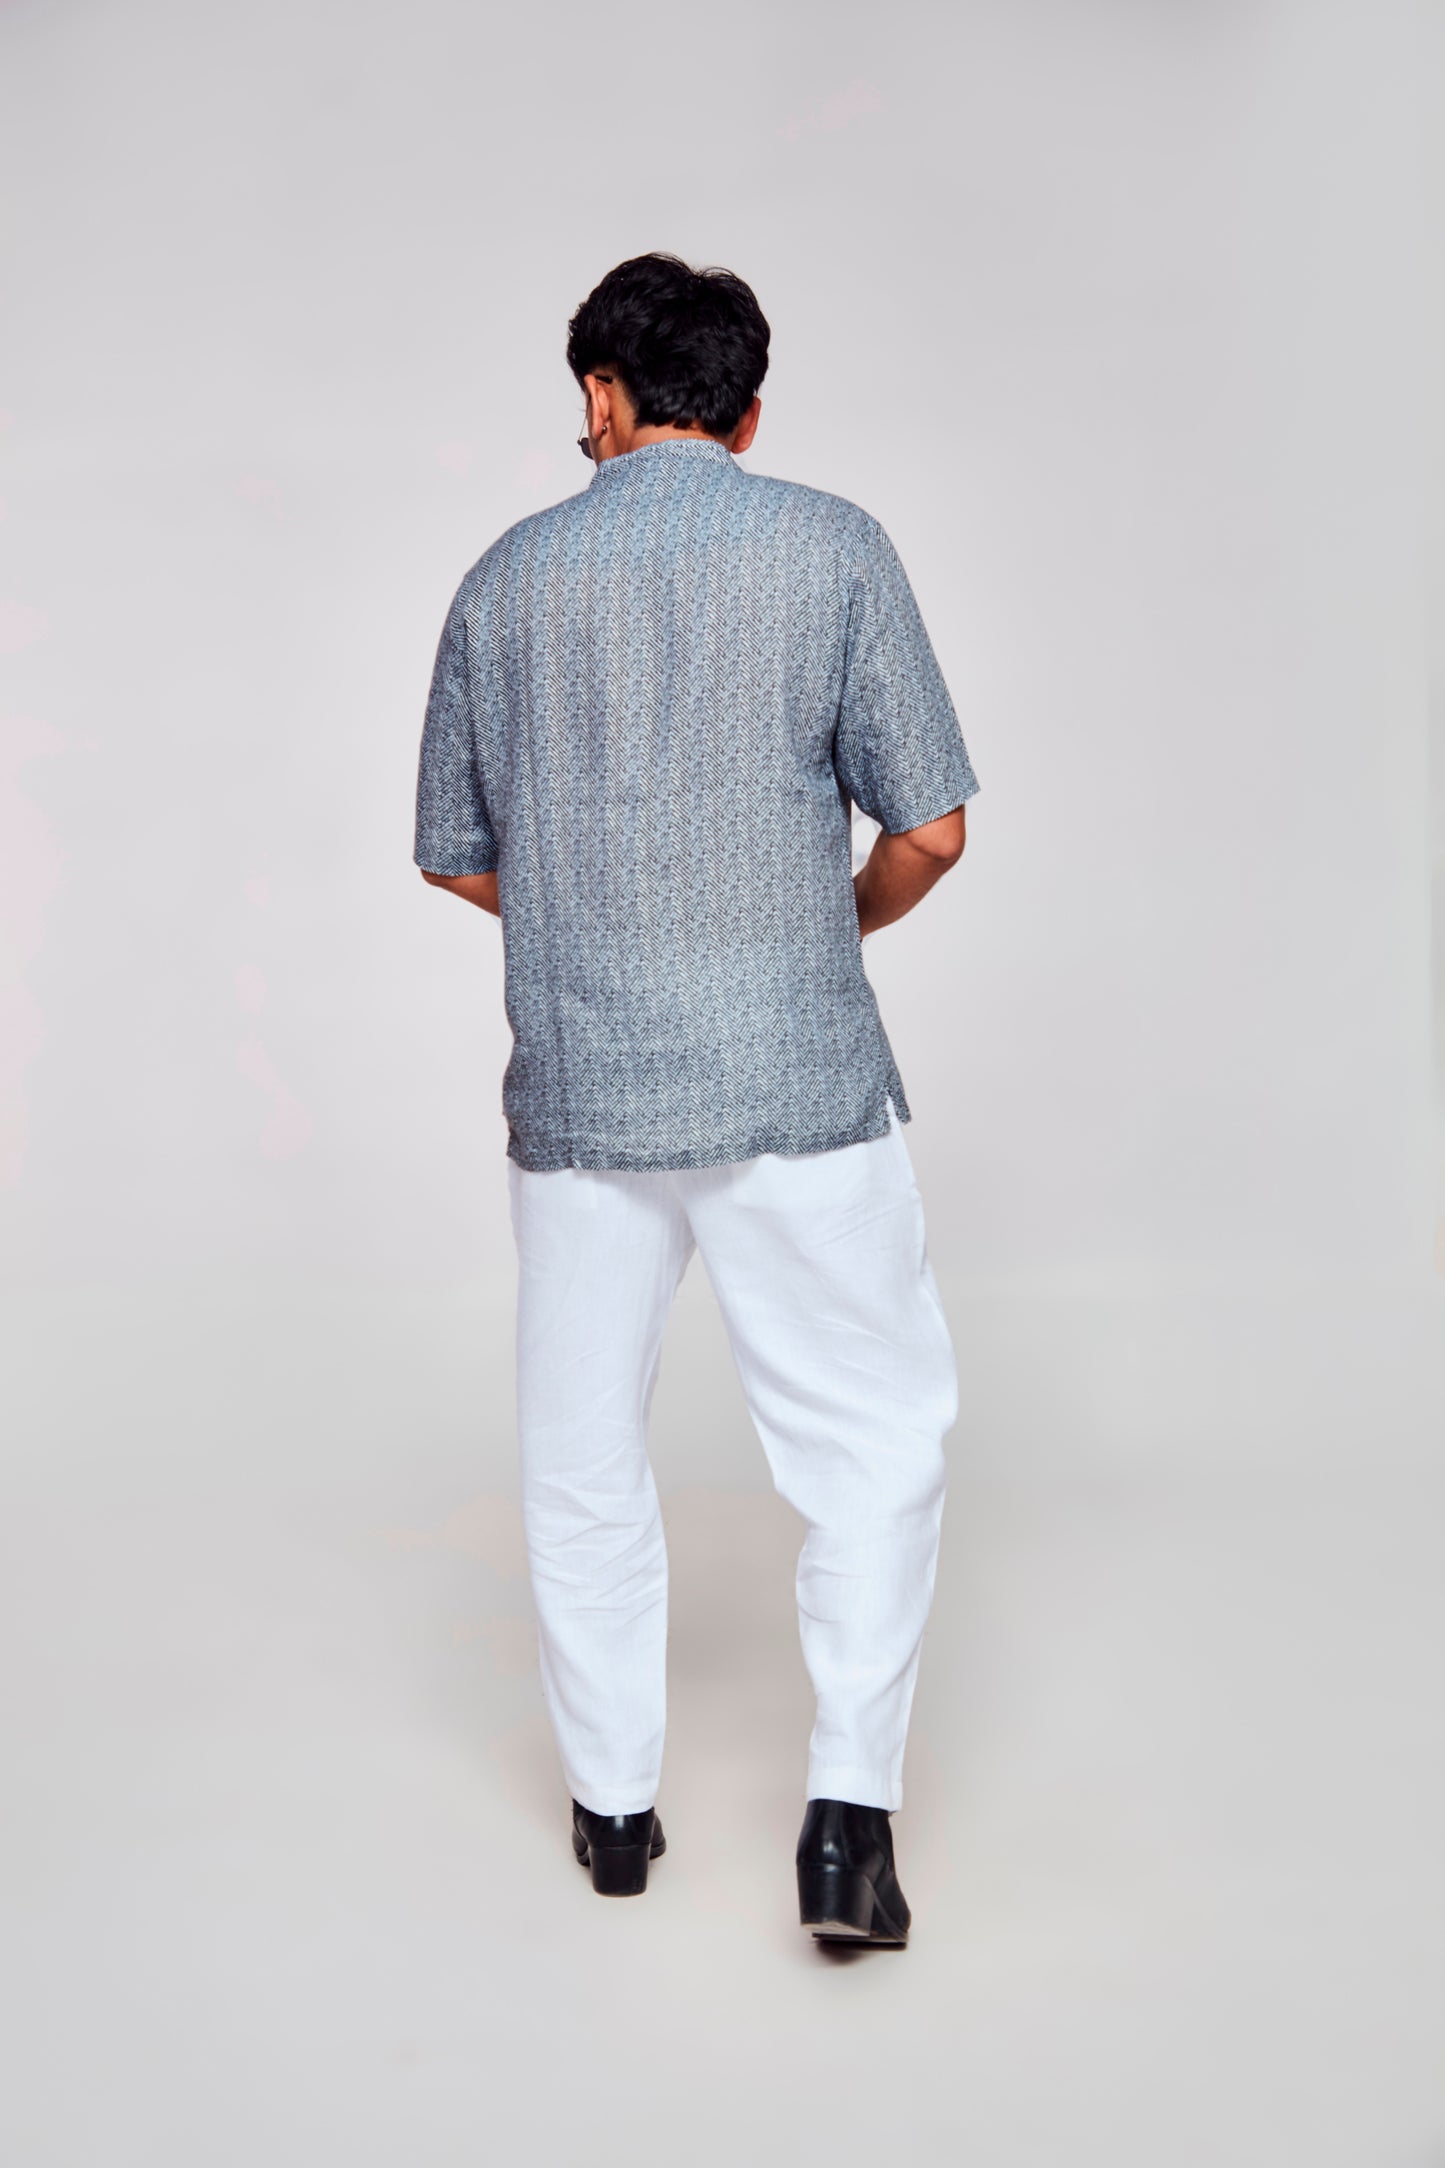 Serenity in Simplicity : The Minimalist Grey and White Pure Linen Short Sleeve Shirt